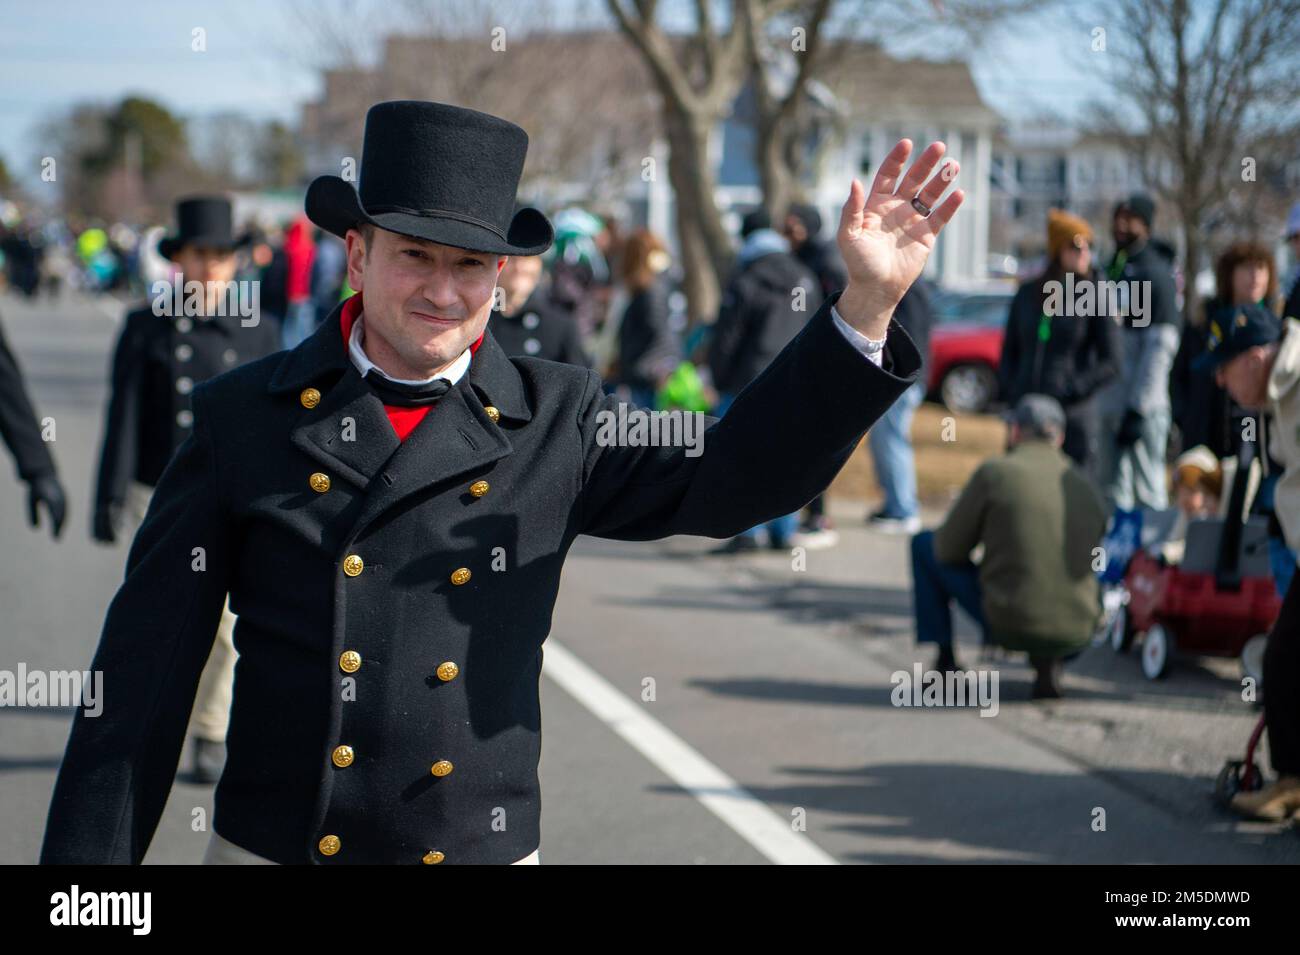 YARMOUTH, Mass. (March 5, 2022) Command Senior Chief Seth Miles, from Payson, Illinois, waves to the crowd during Cape Cod's St. Patrick's Day Parade. USS Constitution, is the world’s oldest commissioned warship afloat, and played a crucial role in the Barbary Wars and the War of 1812, actively defending sea lanes from 1797 to 1855. During normal operations, the active-duty Sailors stationed aboard USS Constitution provide free tours and offer public visitation to more than 600,000 people a year as they support the ship’s mission of promoting the Navy’s history and maritime heritage and raisin Stock Photo